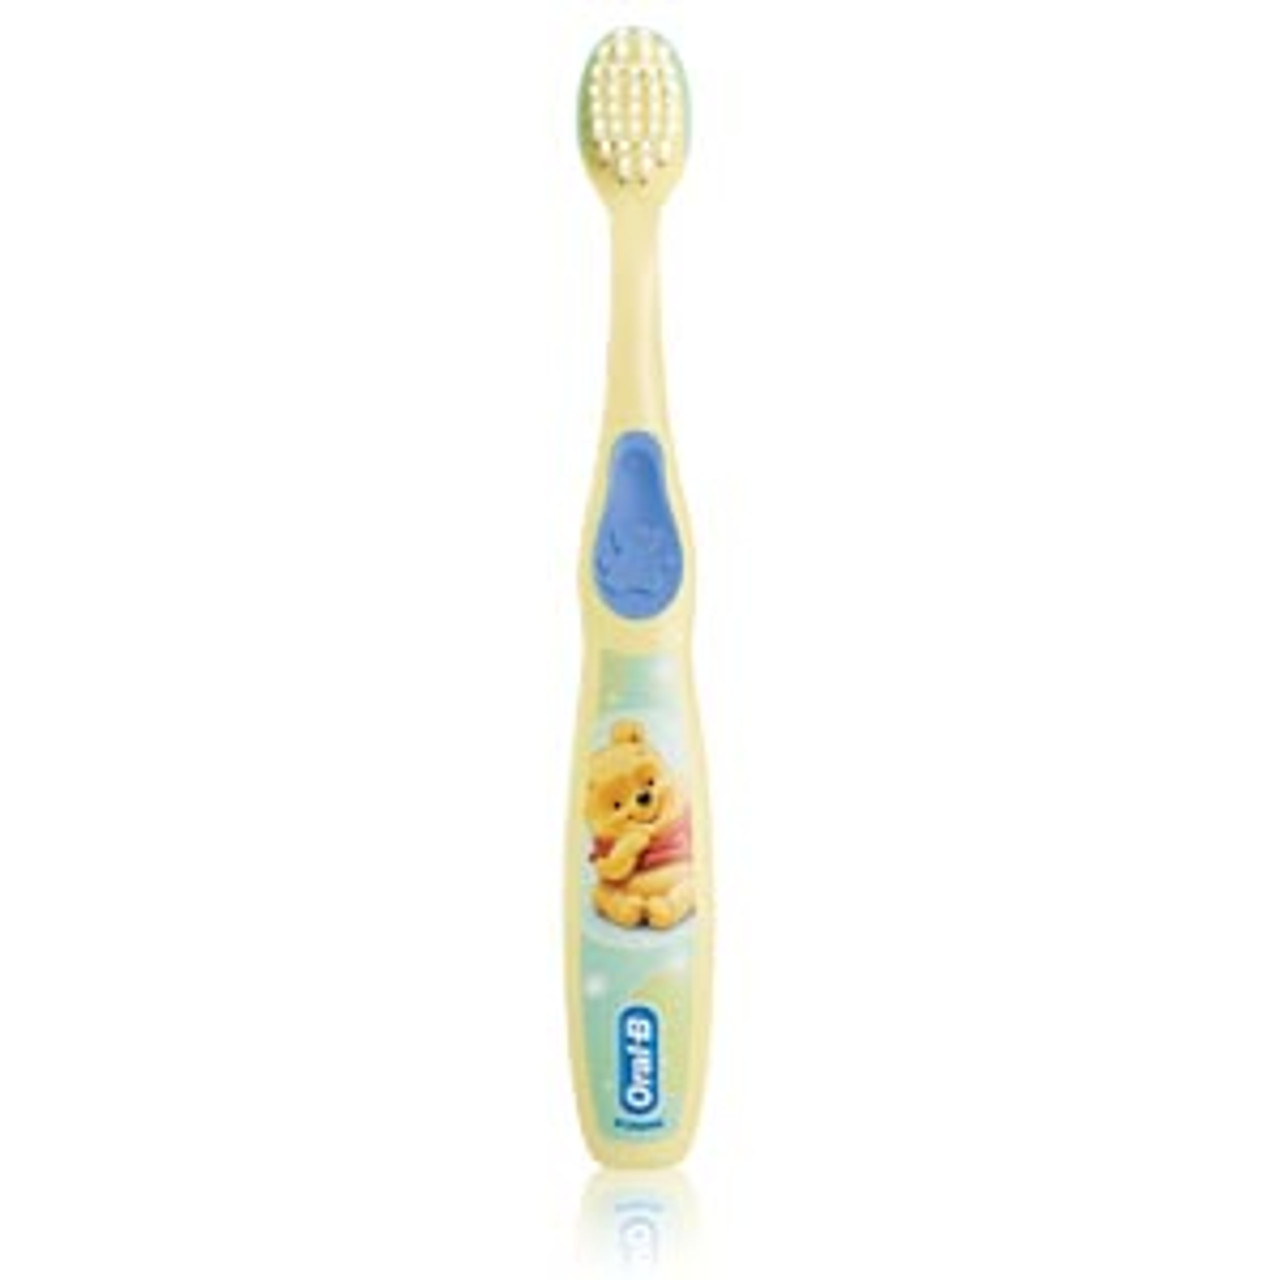 P&G Oral-B Kid's Toothbrush, 0-3 Years, Disney Pooh Character Graphics, 6/bx (old part #s 80333573, 80234065)